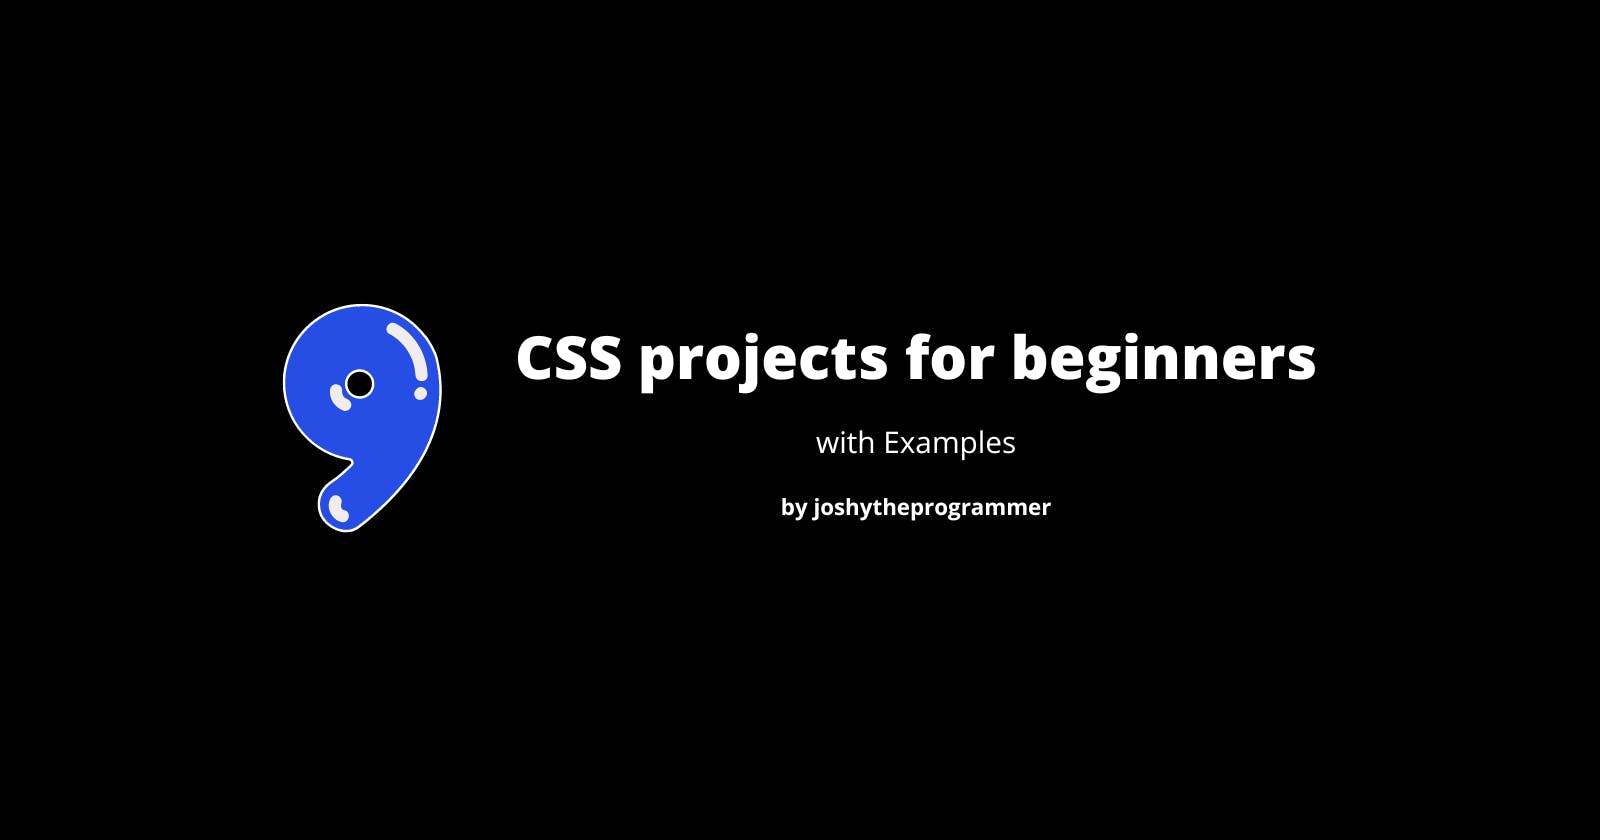 9 CSS projects you can build to get better